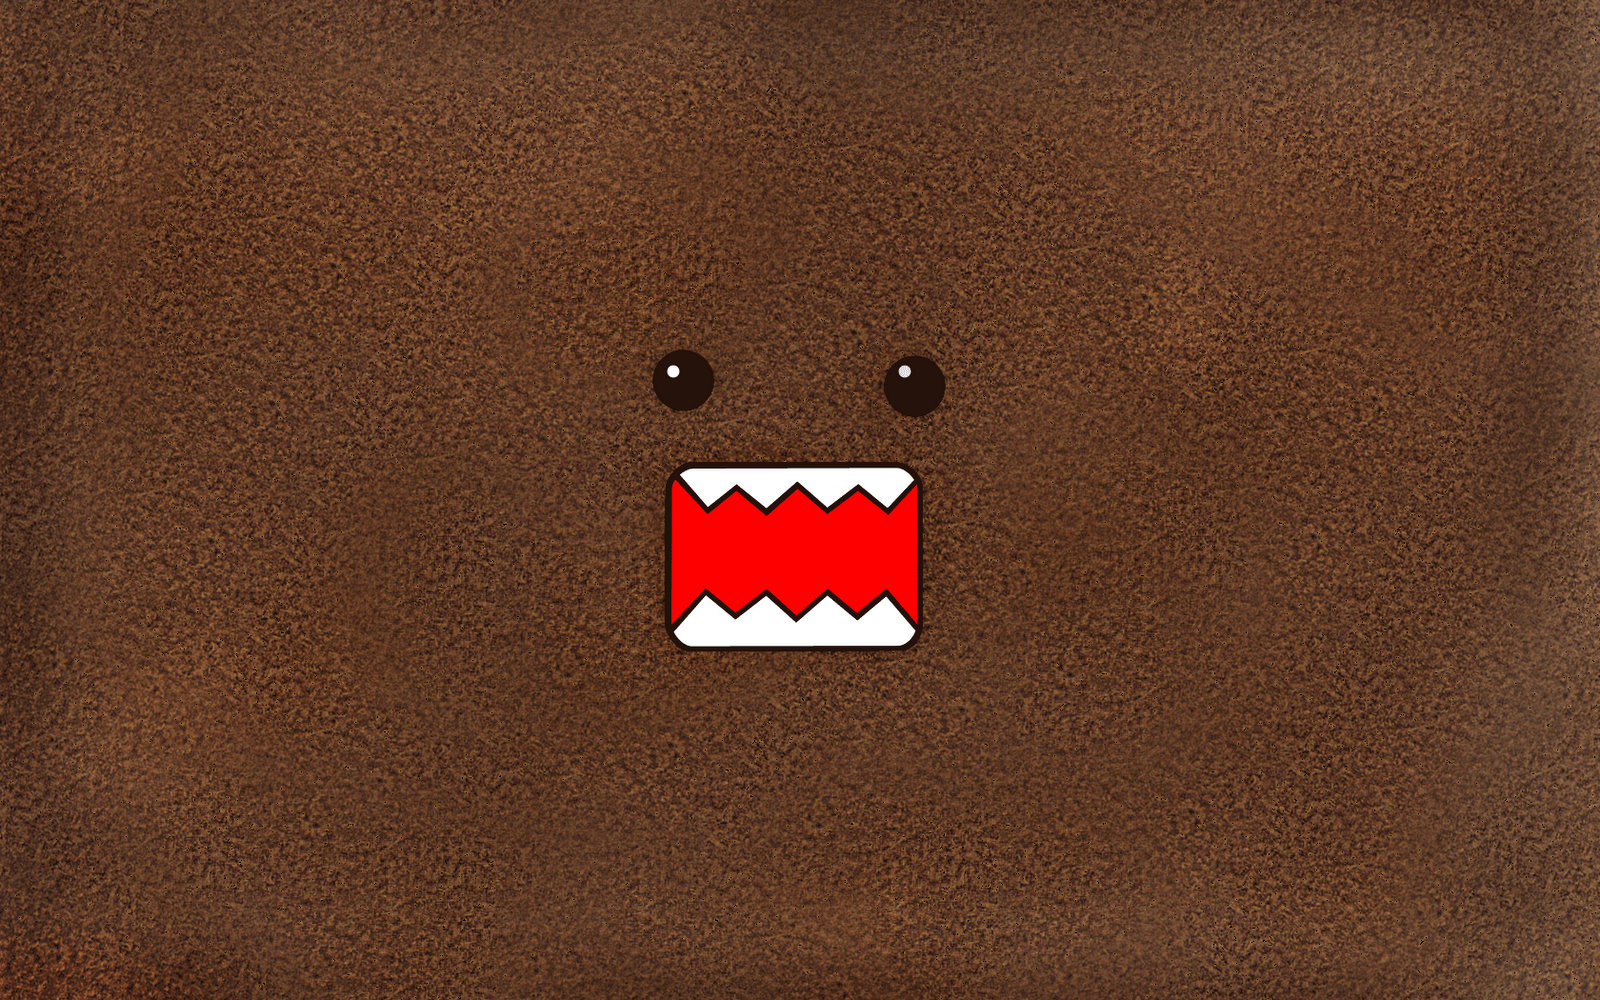 Costume Domo Wallpaperdomo HD Wallpaper X Background And